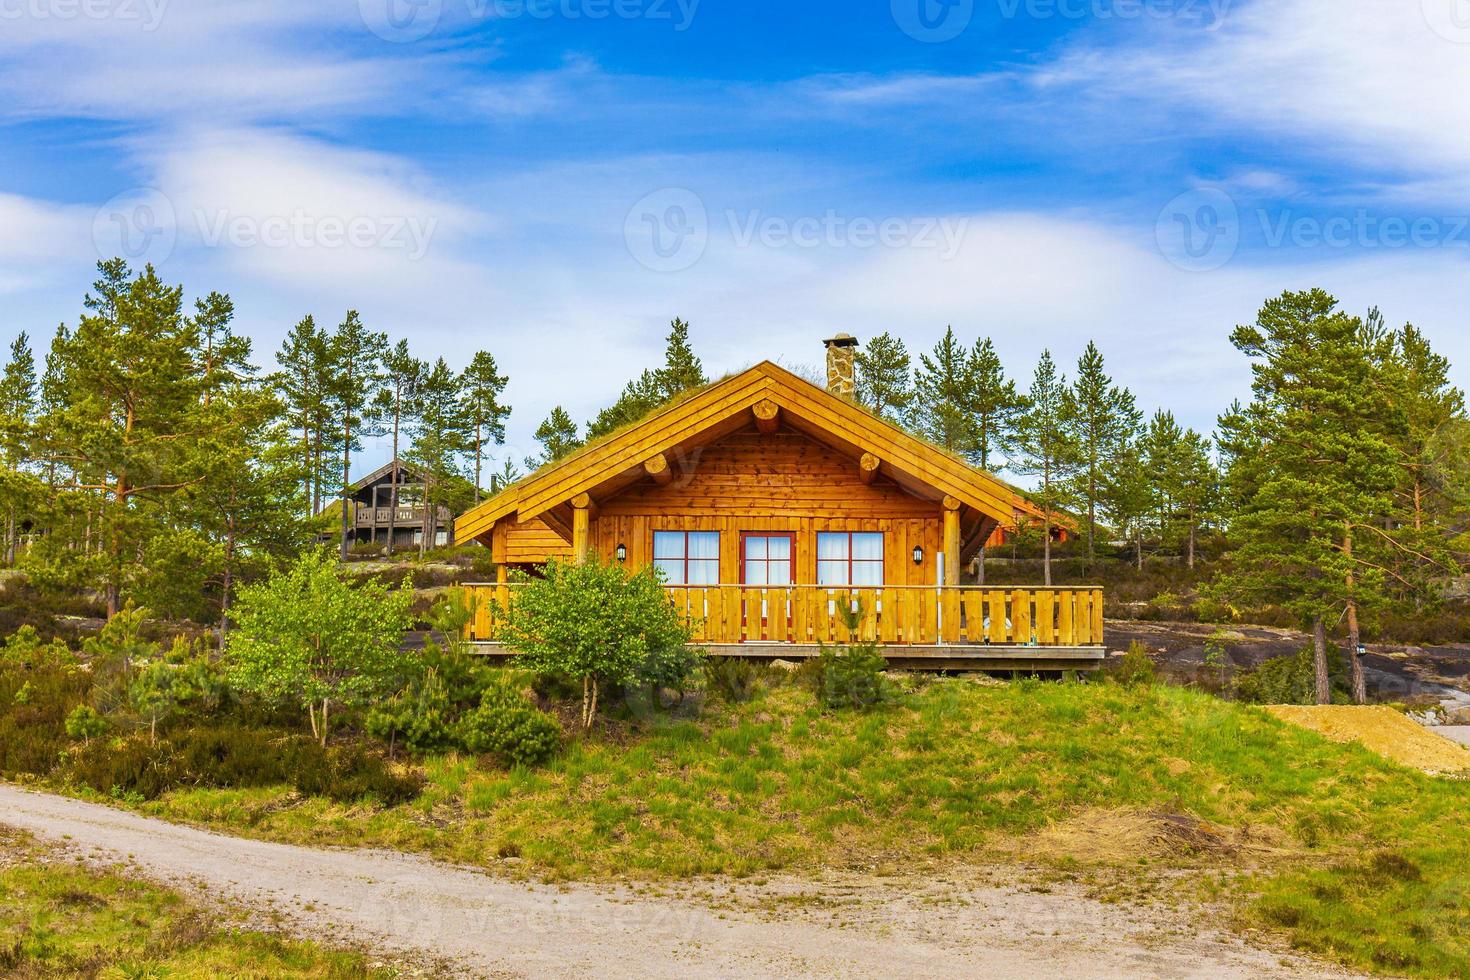 Norwegian wooden cabins cottages in the nature landscape Nissedal Norway. photo